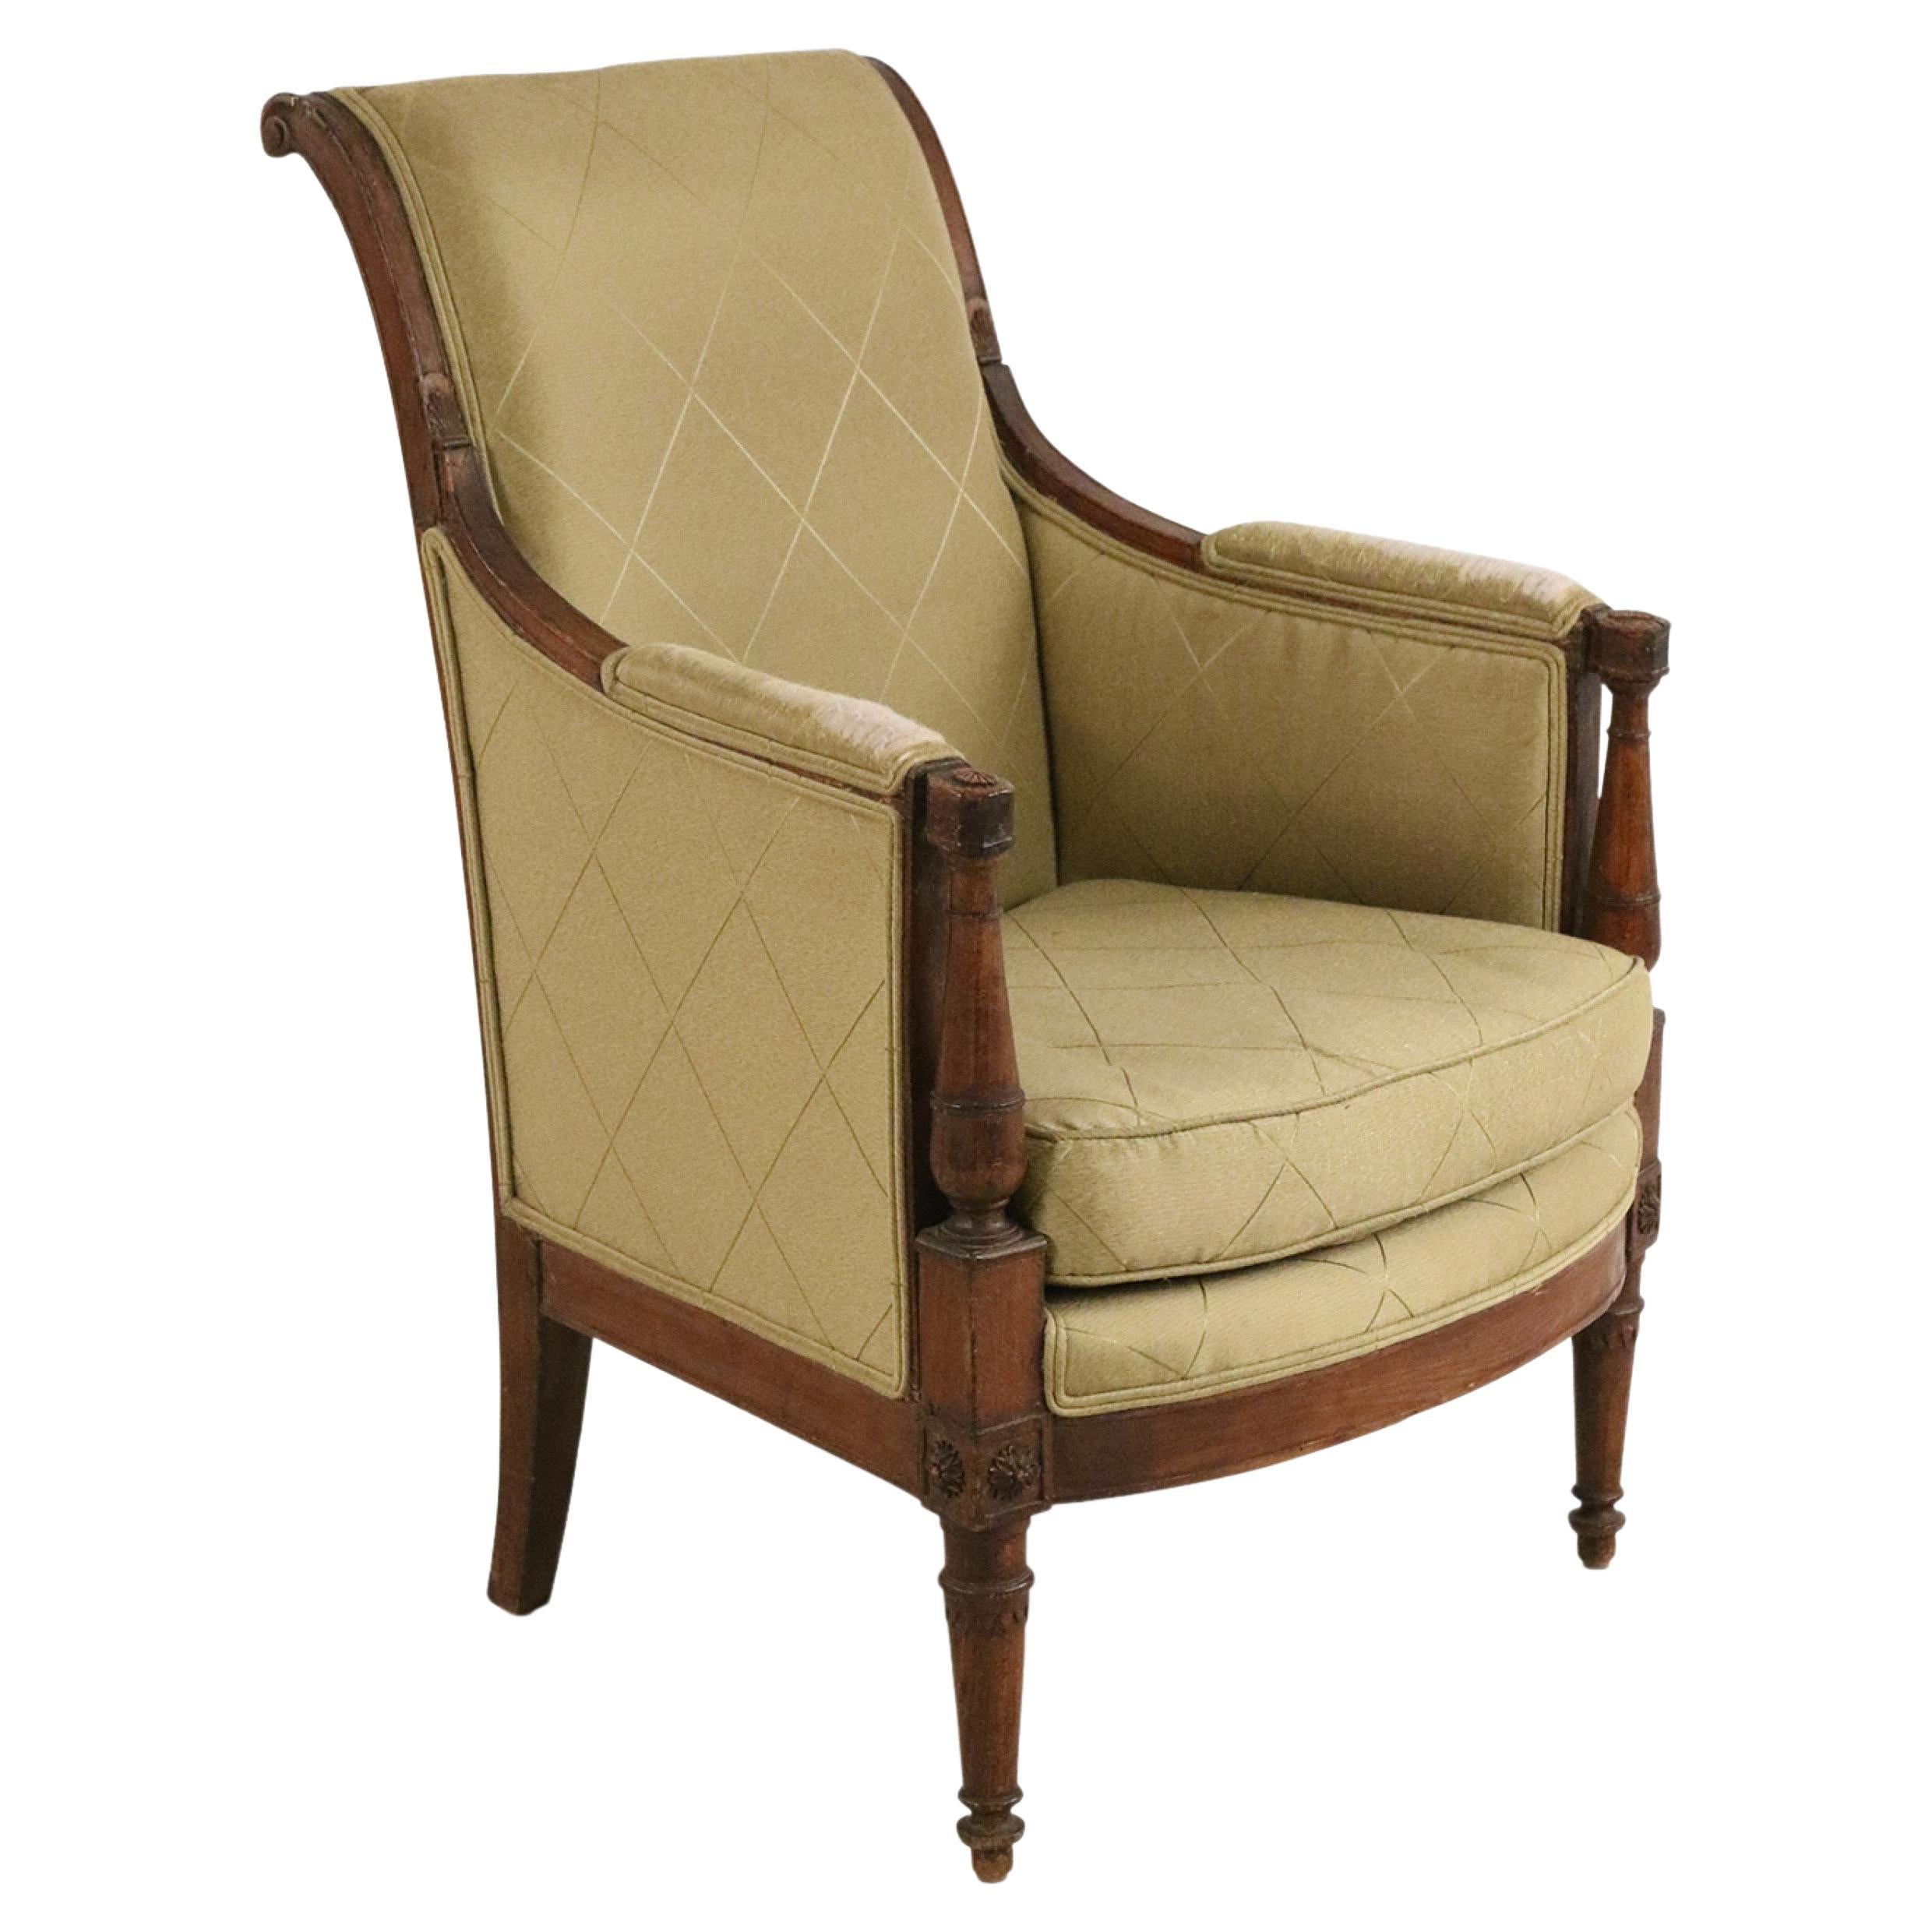 French Directoire Green Diamond Pattern Upholstered Mahogany Bergere Armchair